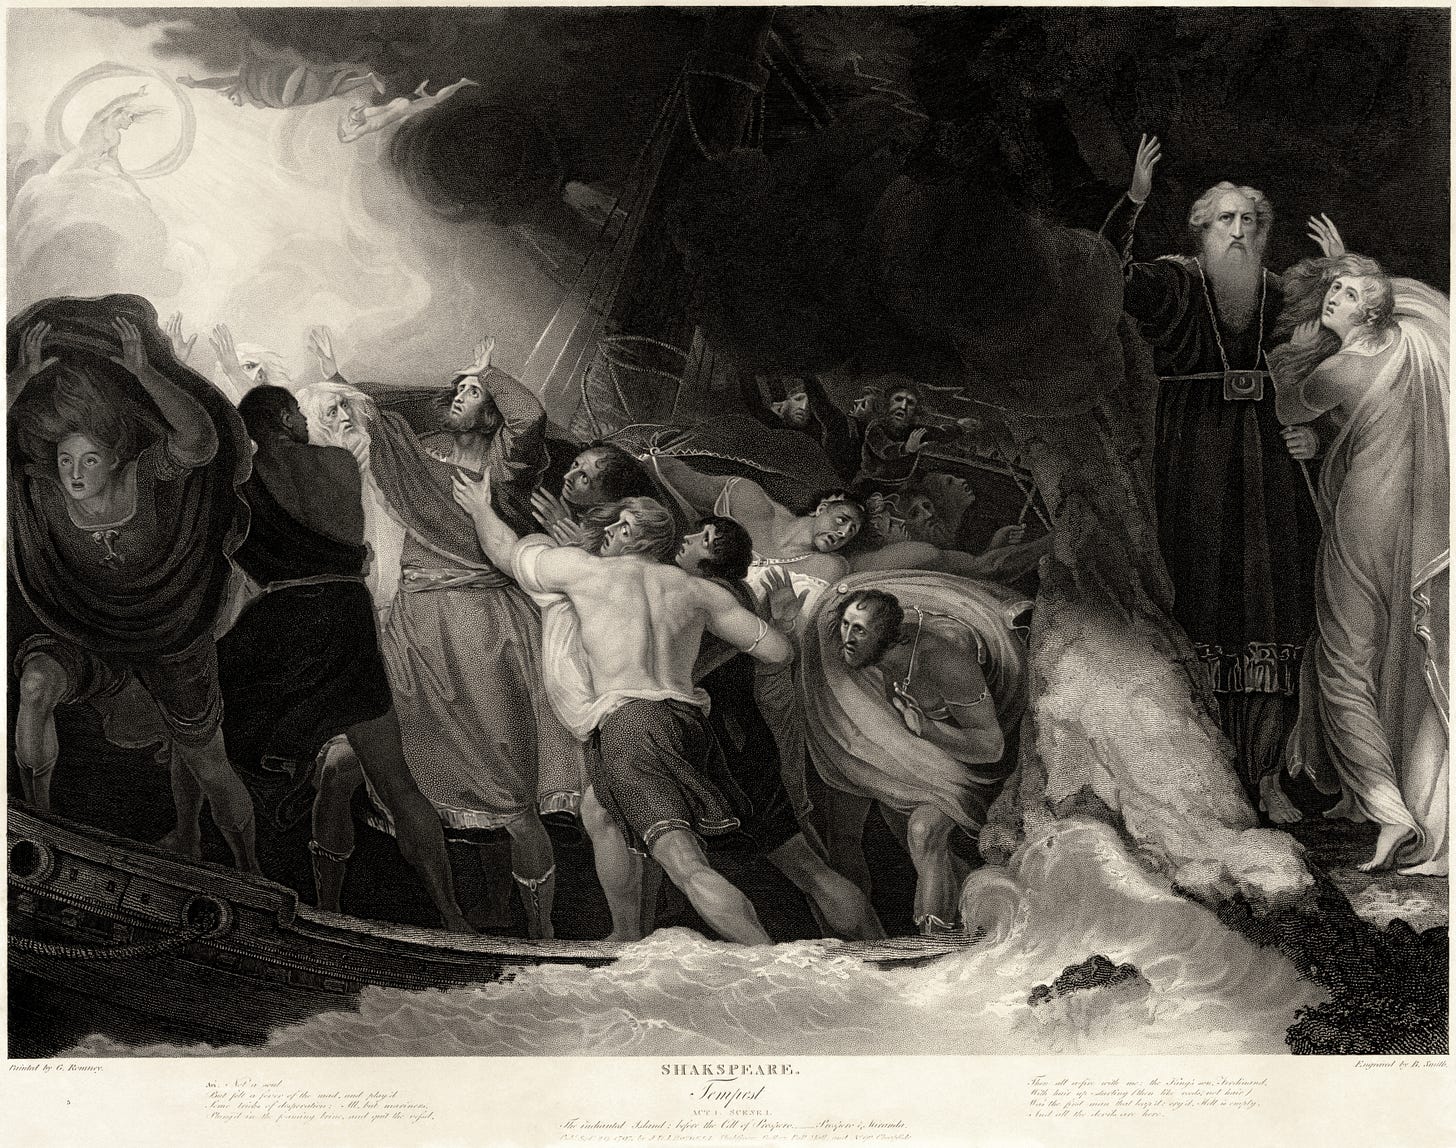 Engraving of The Tempest